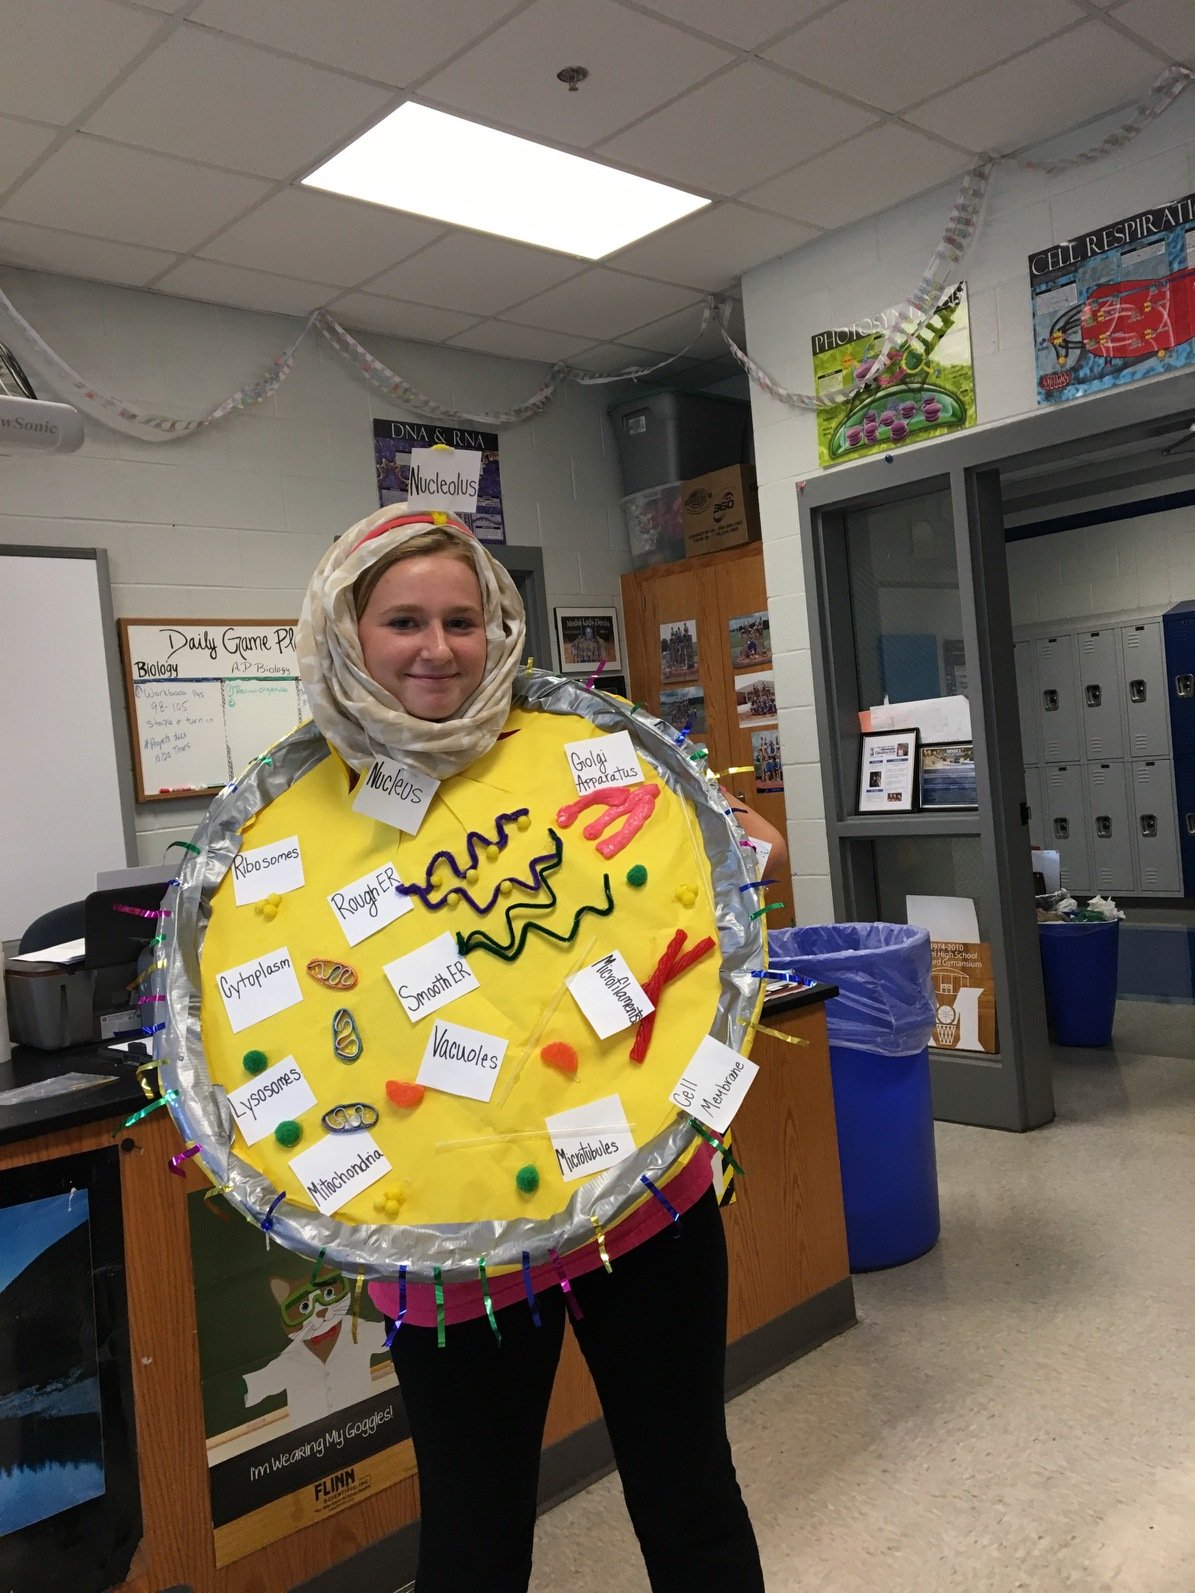 cell projects for high school biology